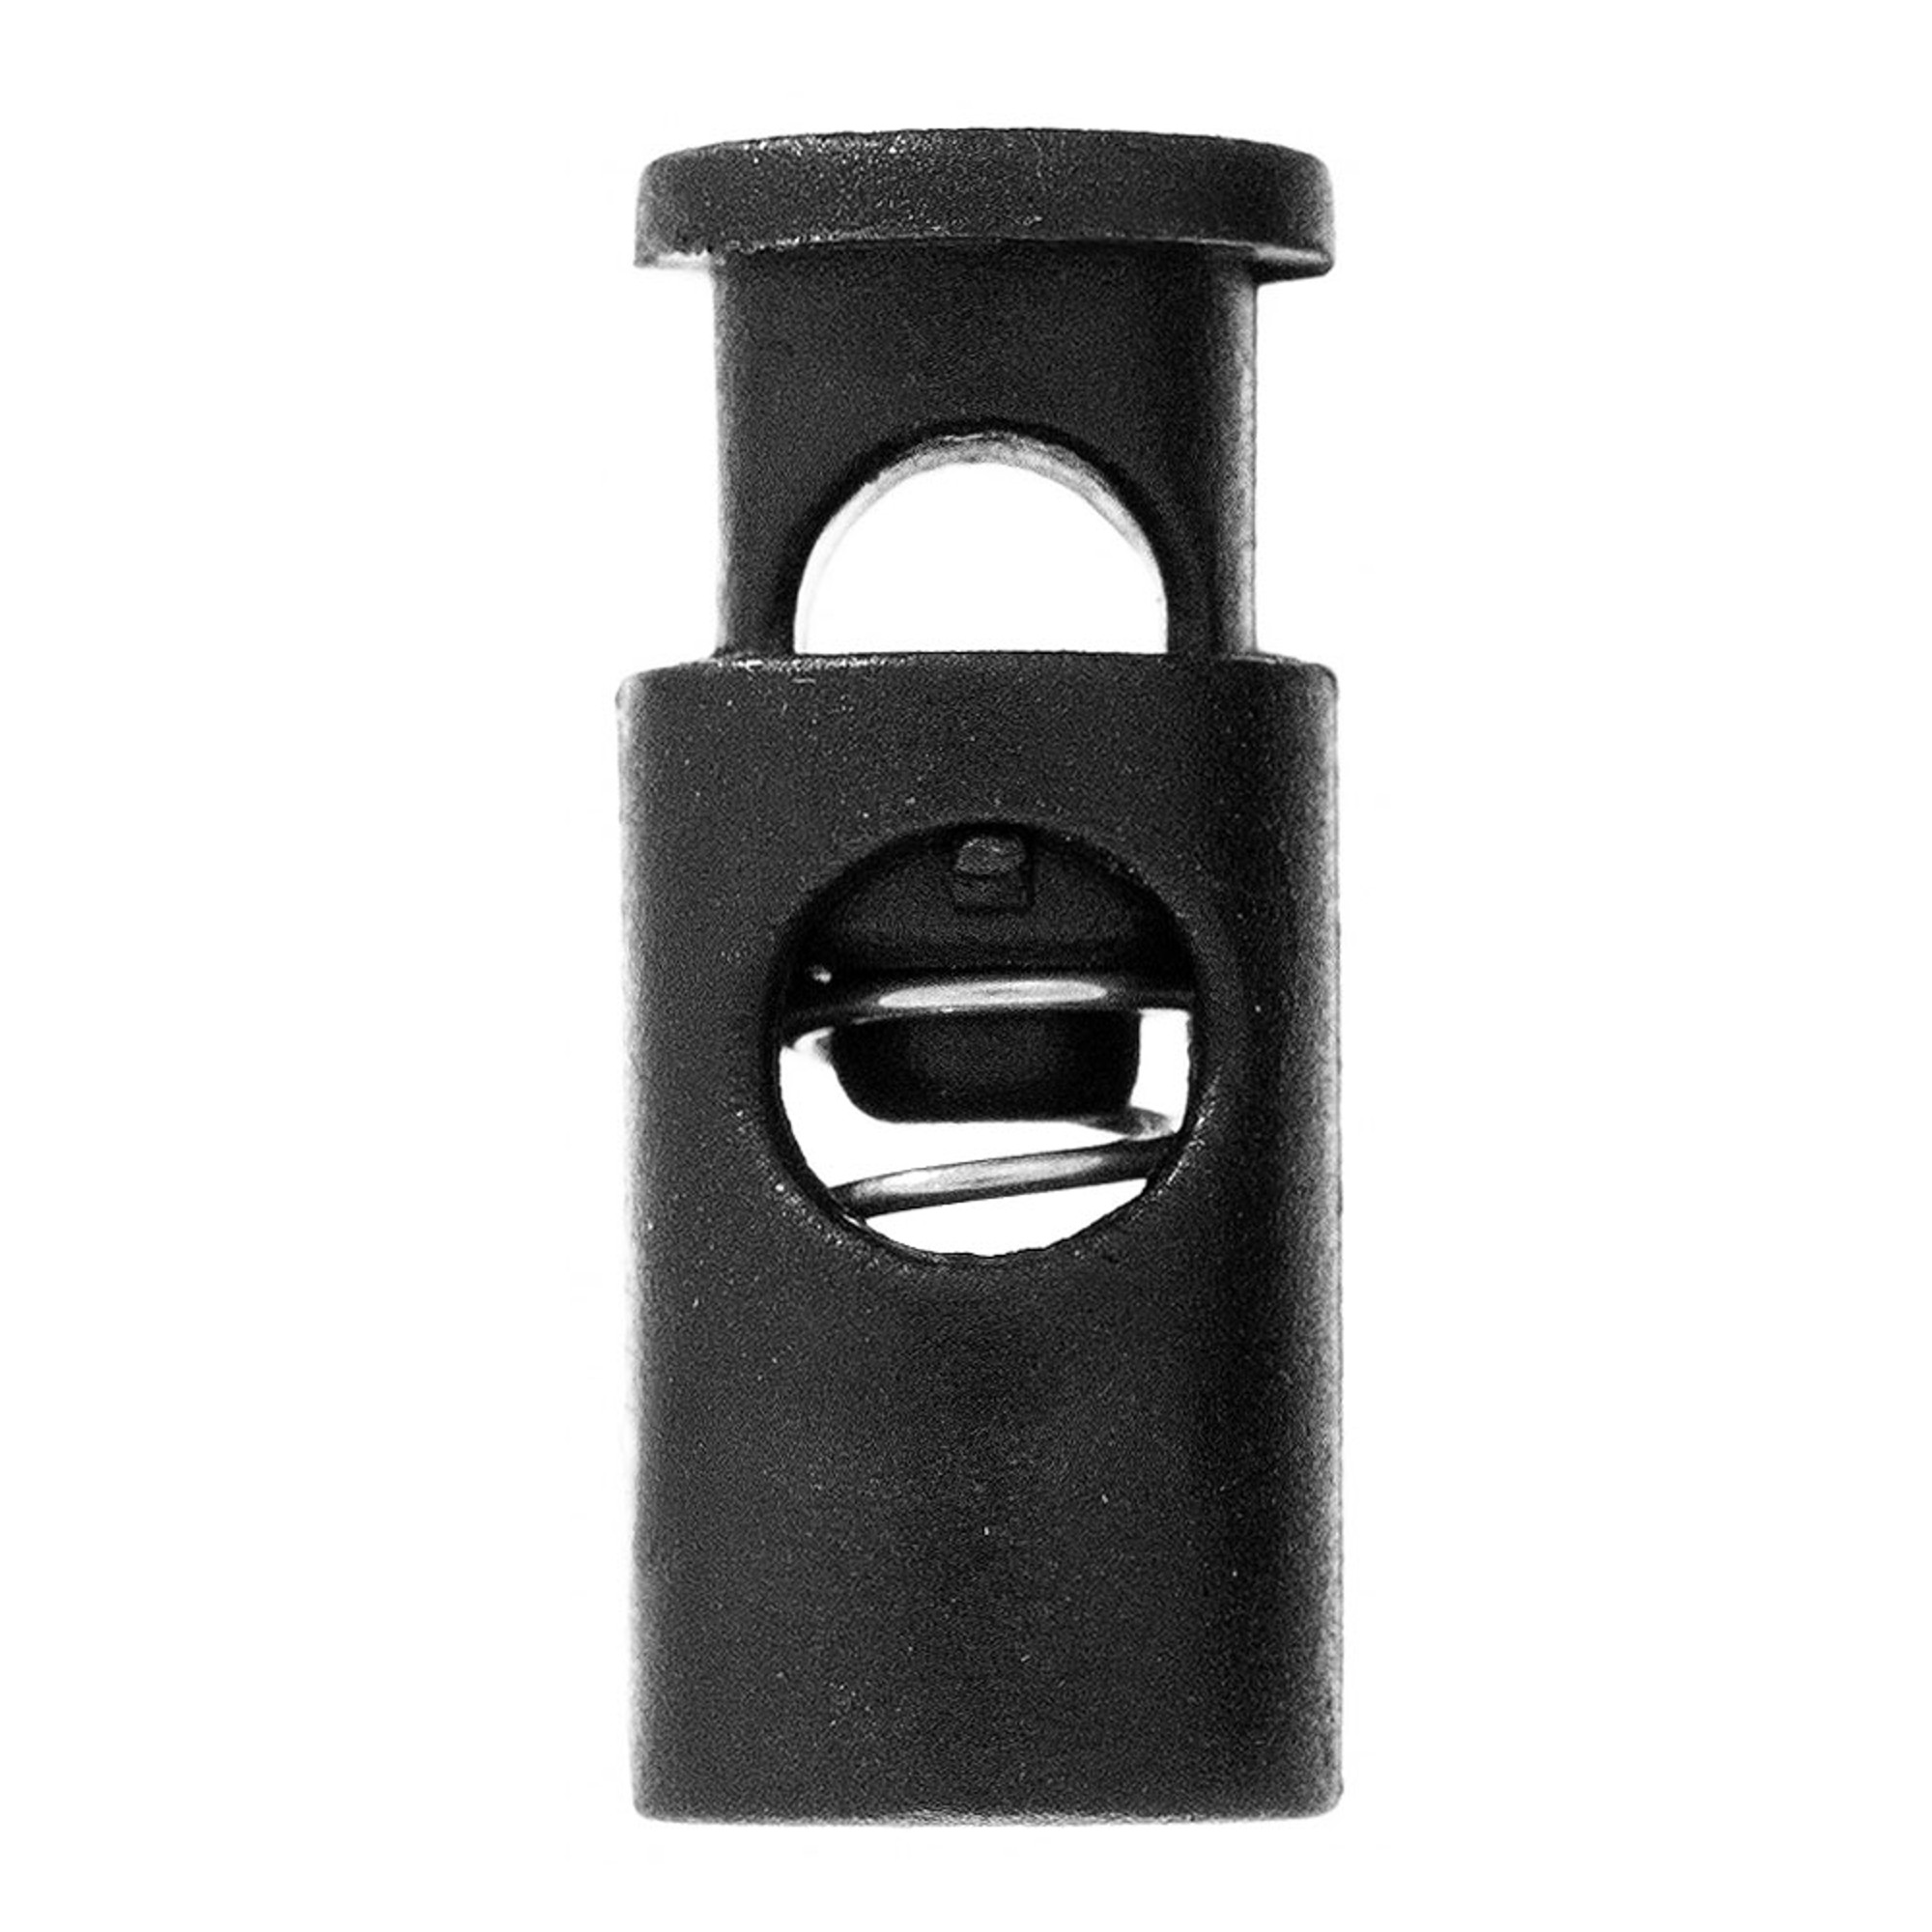 West Coast Paracord Mini Plastic Spring Cord Lock - Toggle Stopper Design  Available in Pack Sizes of 5, 10, 25, 50, 100 - Ideal for Drawstrings